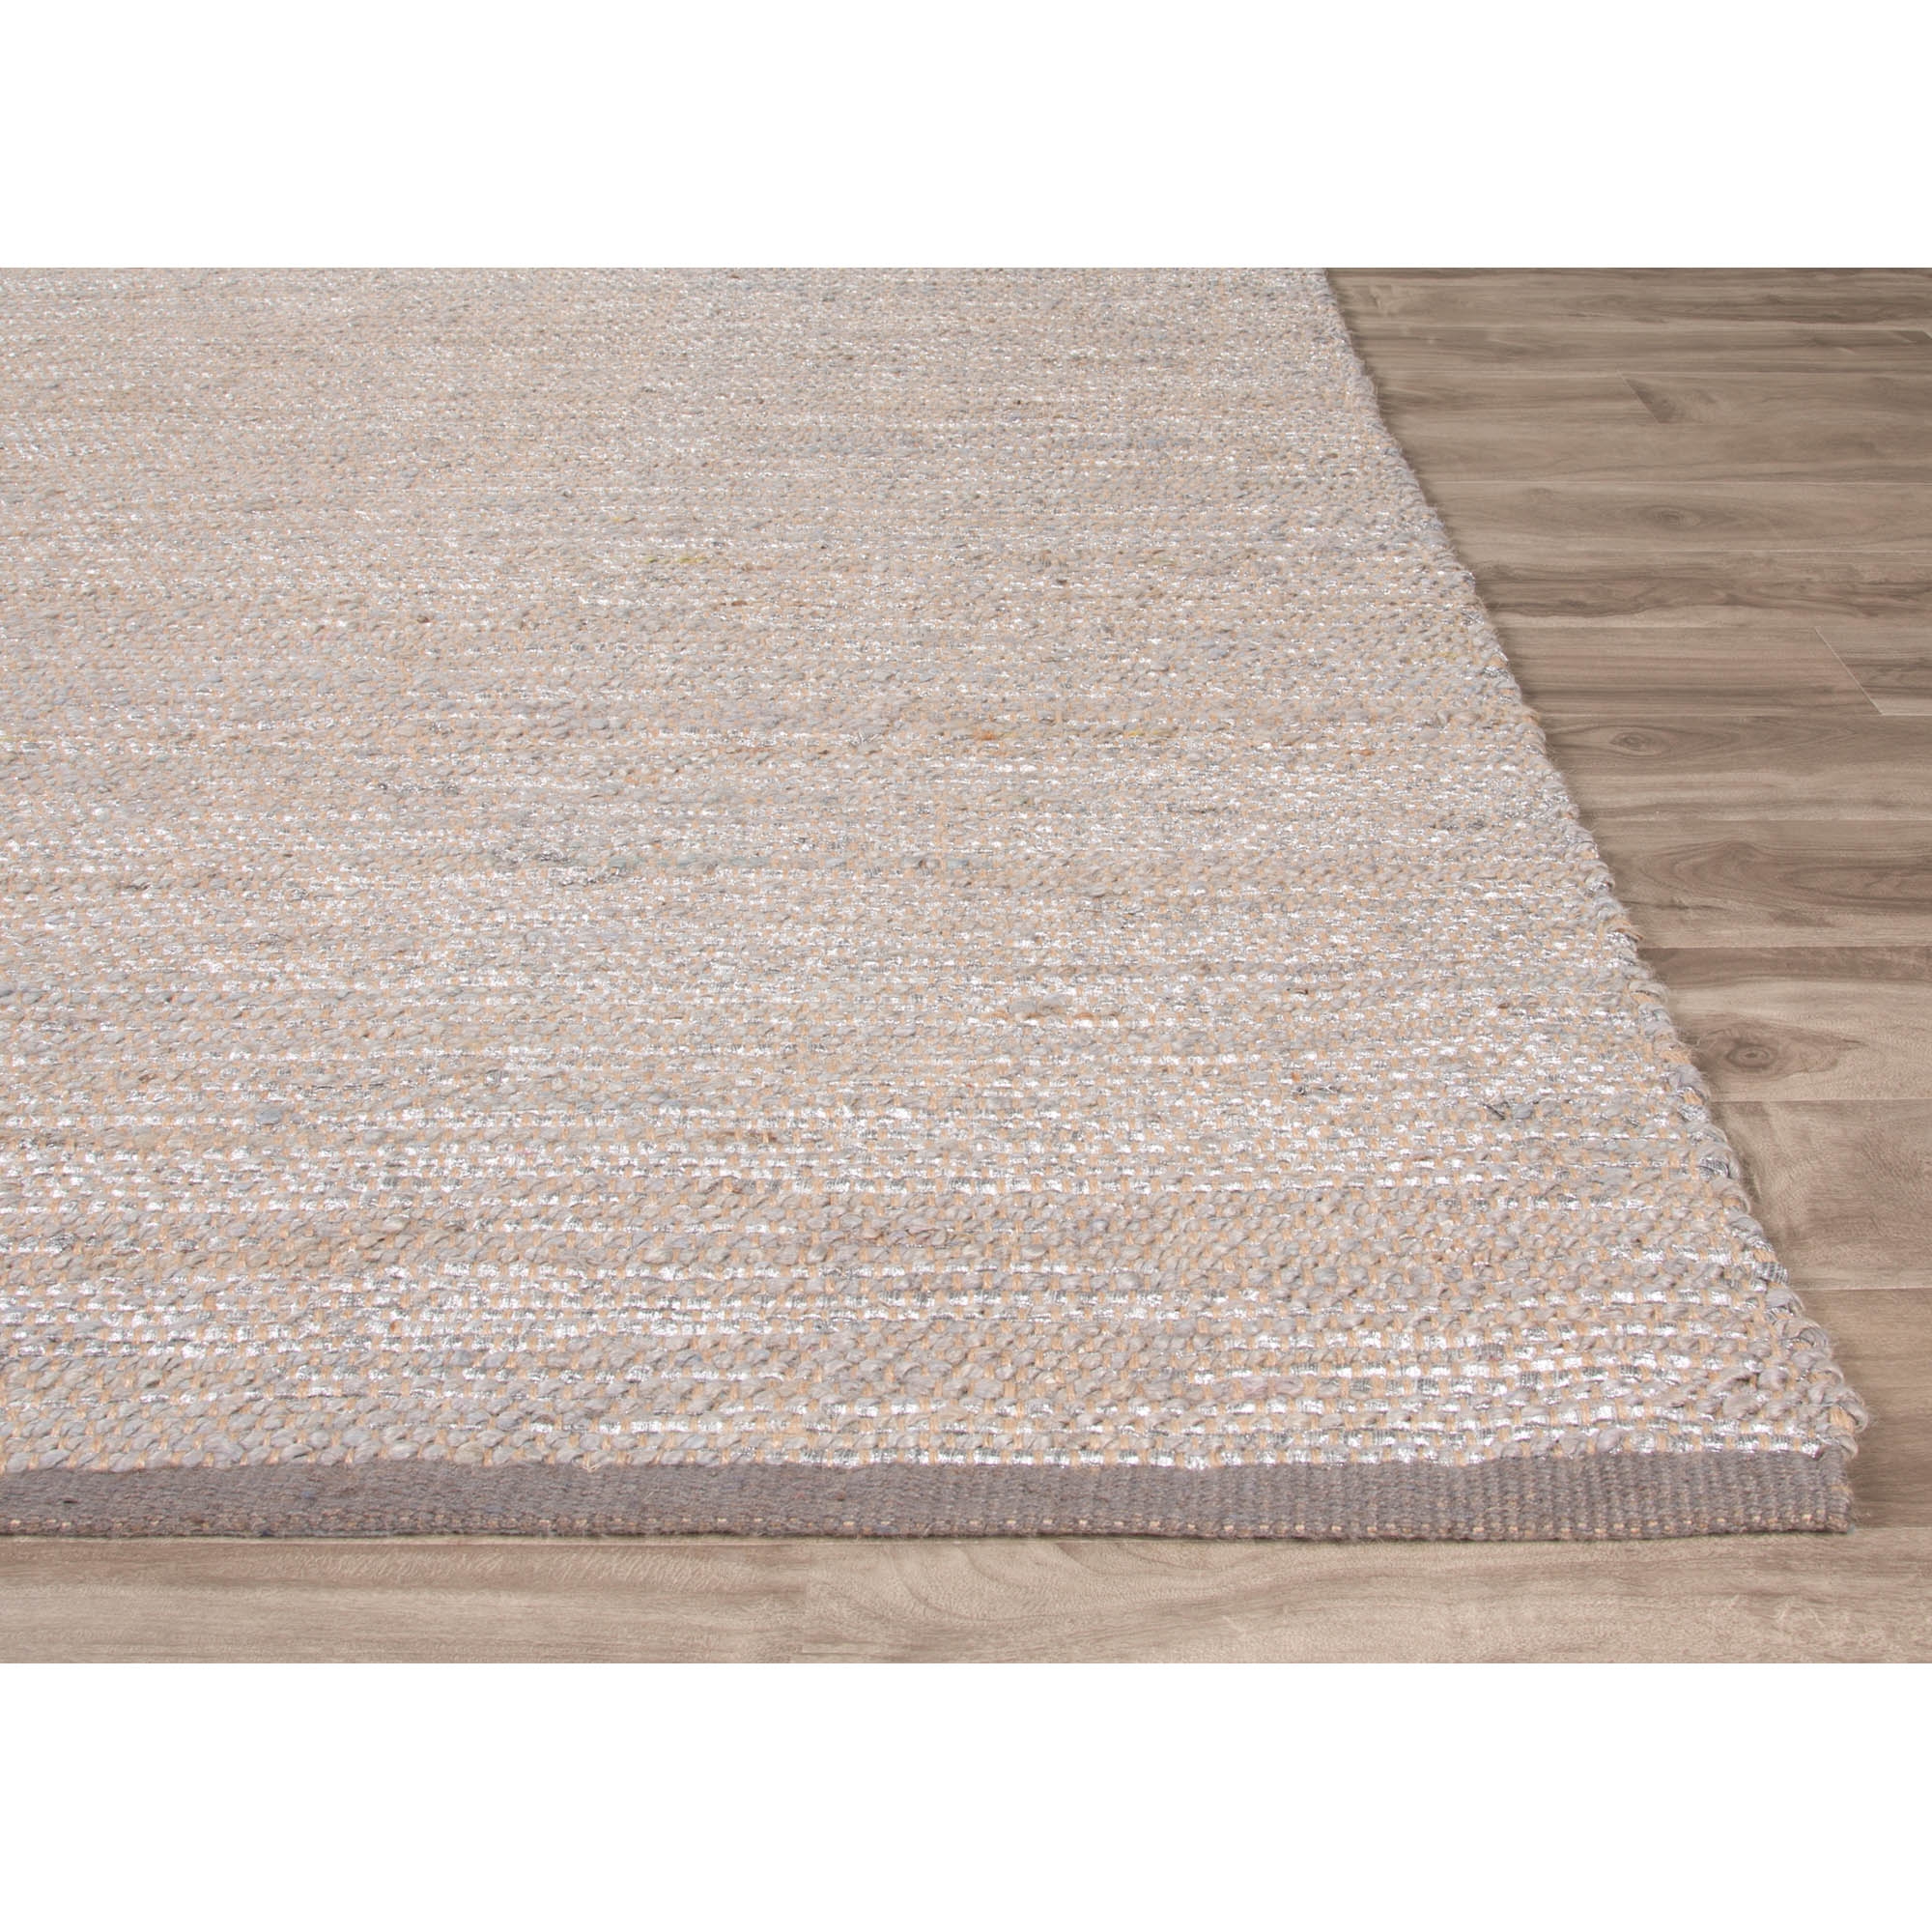 Nikki Chu by Vega Natural Solid Gray/ Silver Square Area Rug (8' X 8') - Image 2